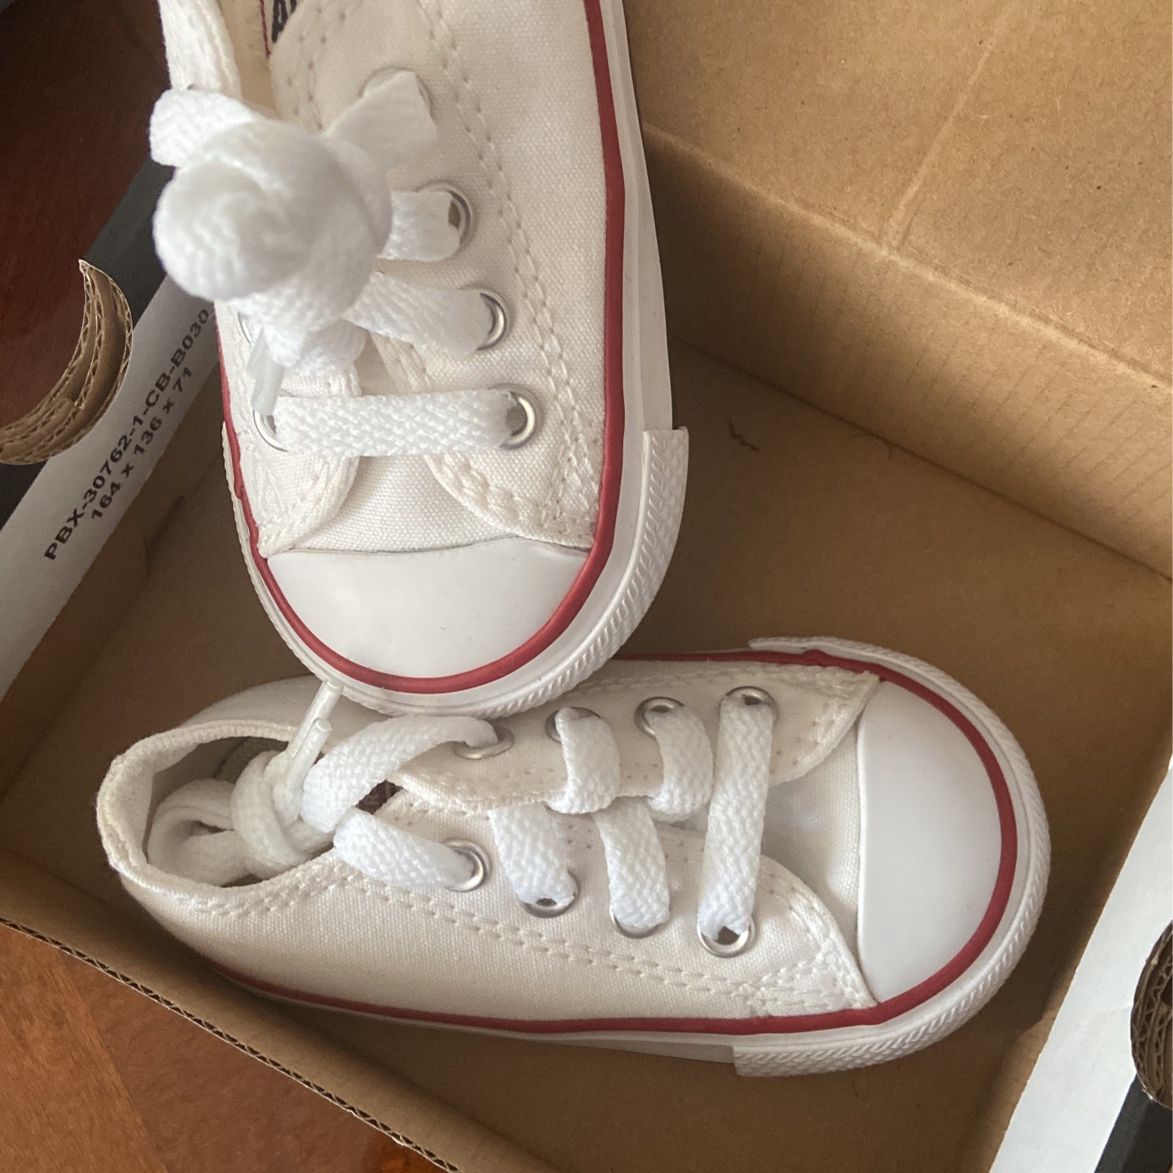 Converse infant Size 4 for Sale in Naples, FL OfferUp